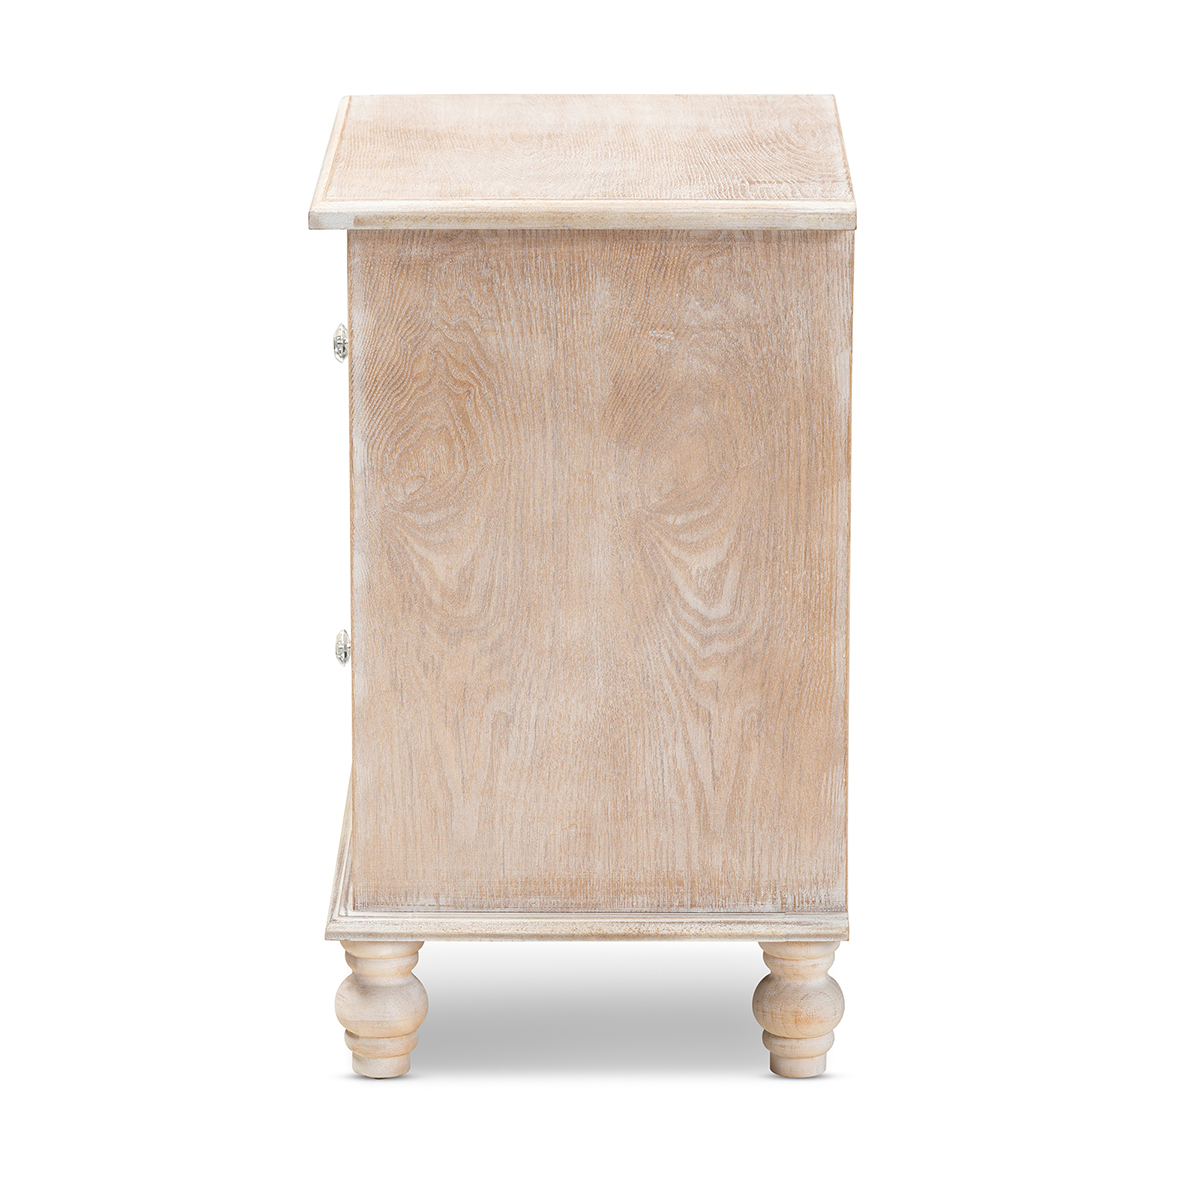 Baxton Studio Celia Rustic French Country 2 Drawer Nightstand